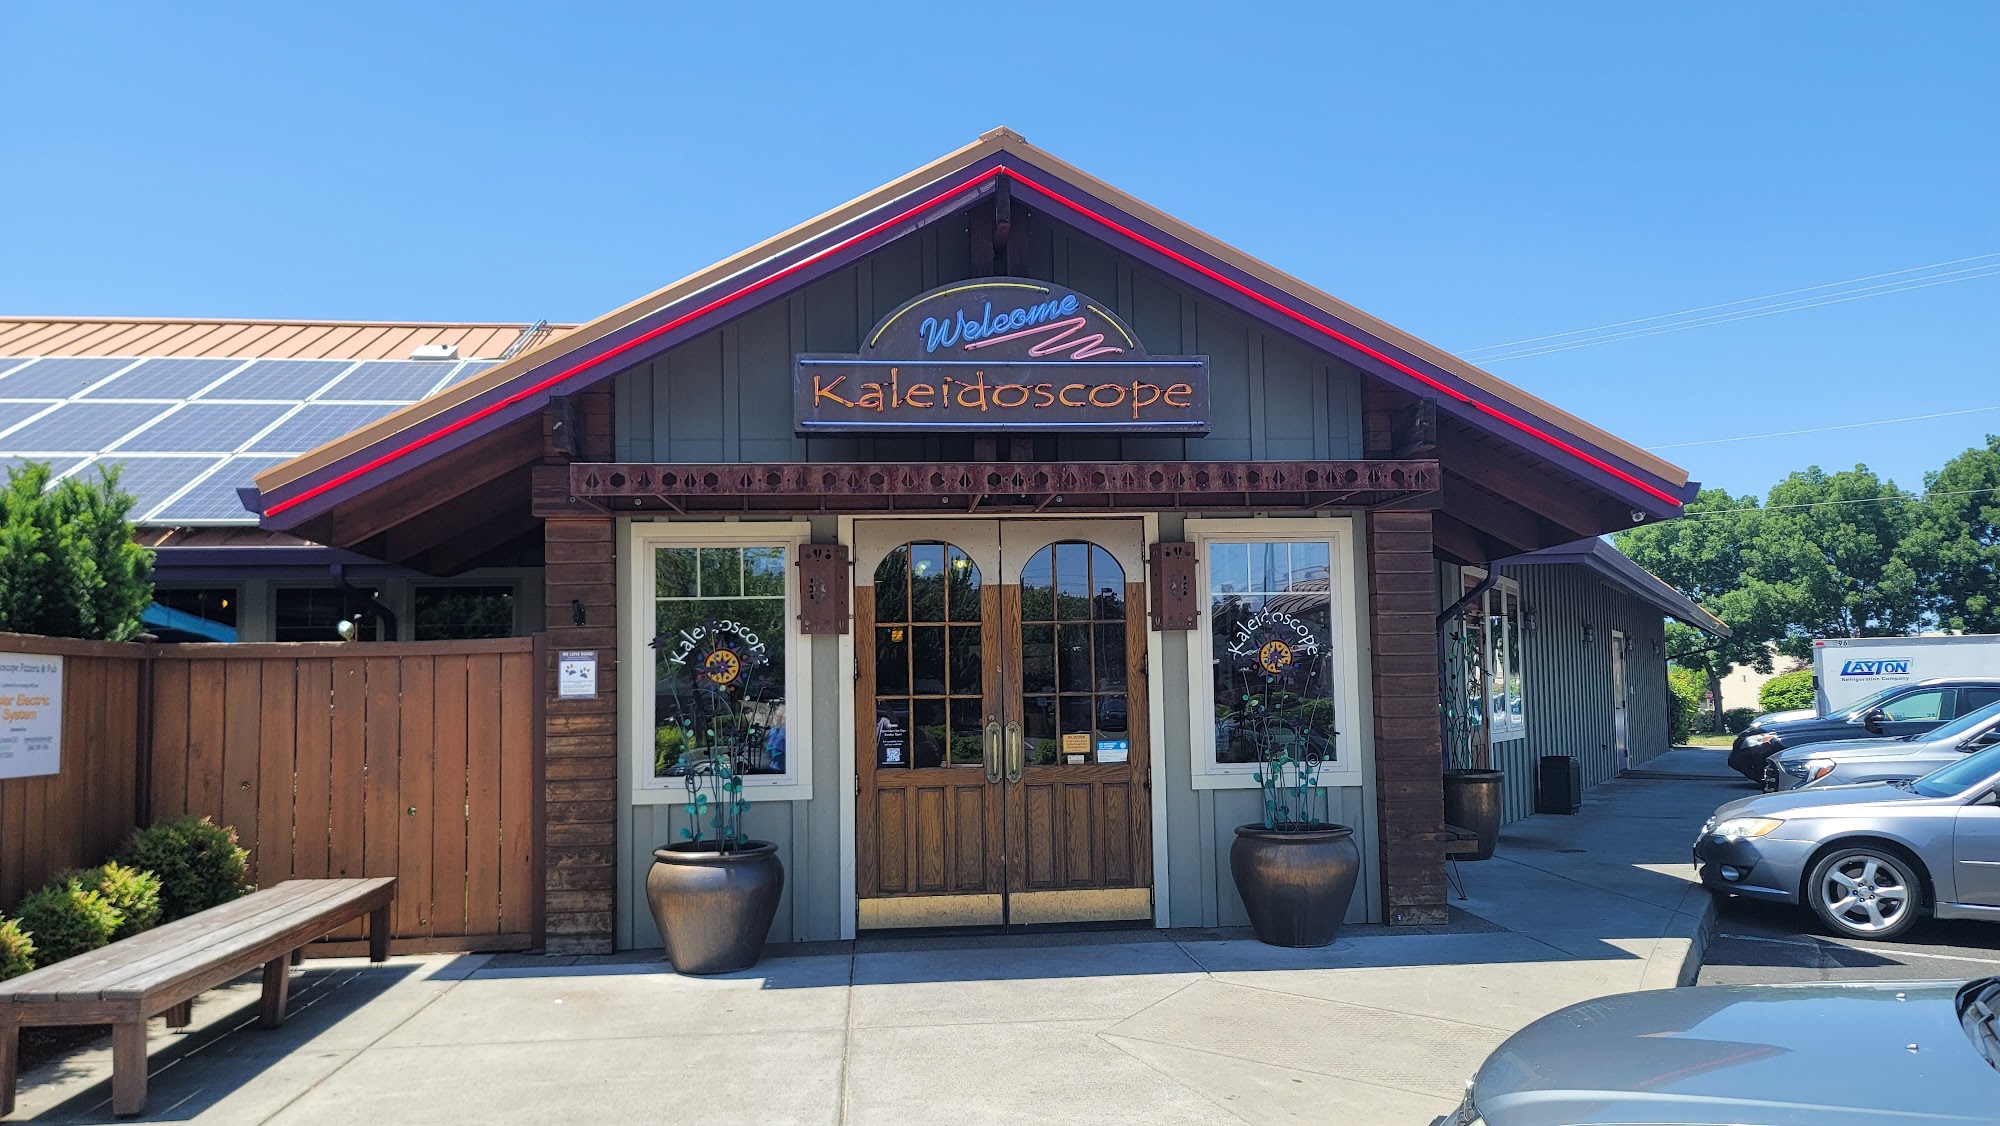 Kaleidoscope Pizzeria & Pub 3084 Crater Lake Hwy, 1923 Delta Waters Rd, Medford, OR 97504